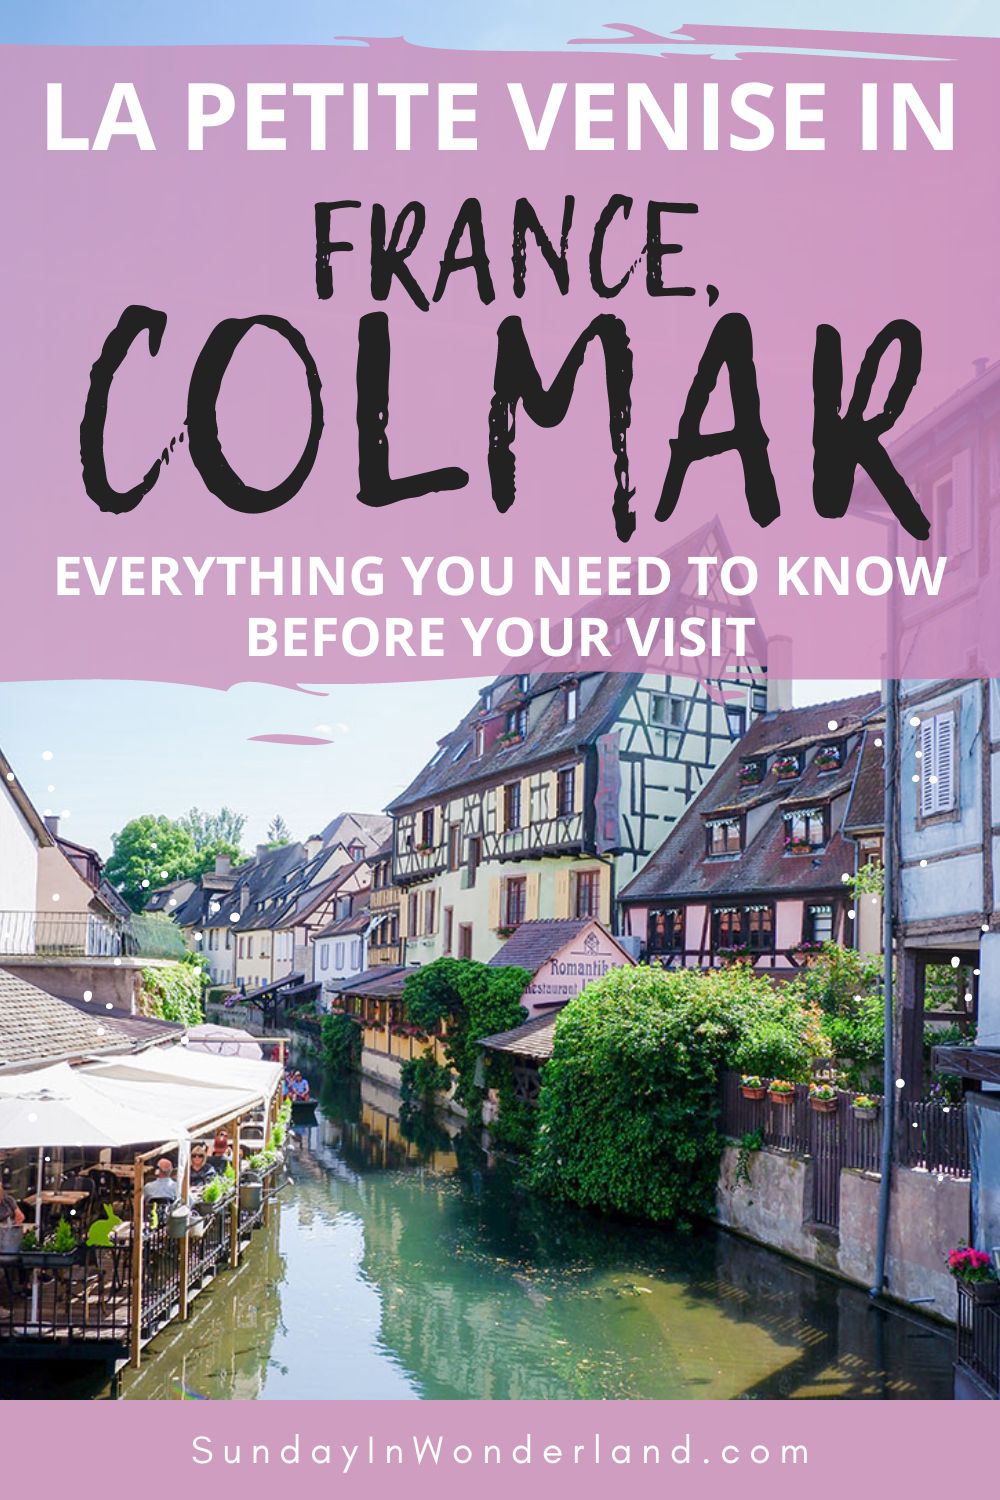 La Petite Venise Colmar - how to spend time there - Pinterest pin